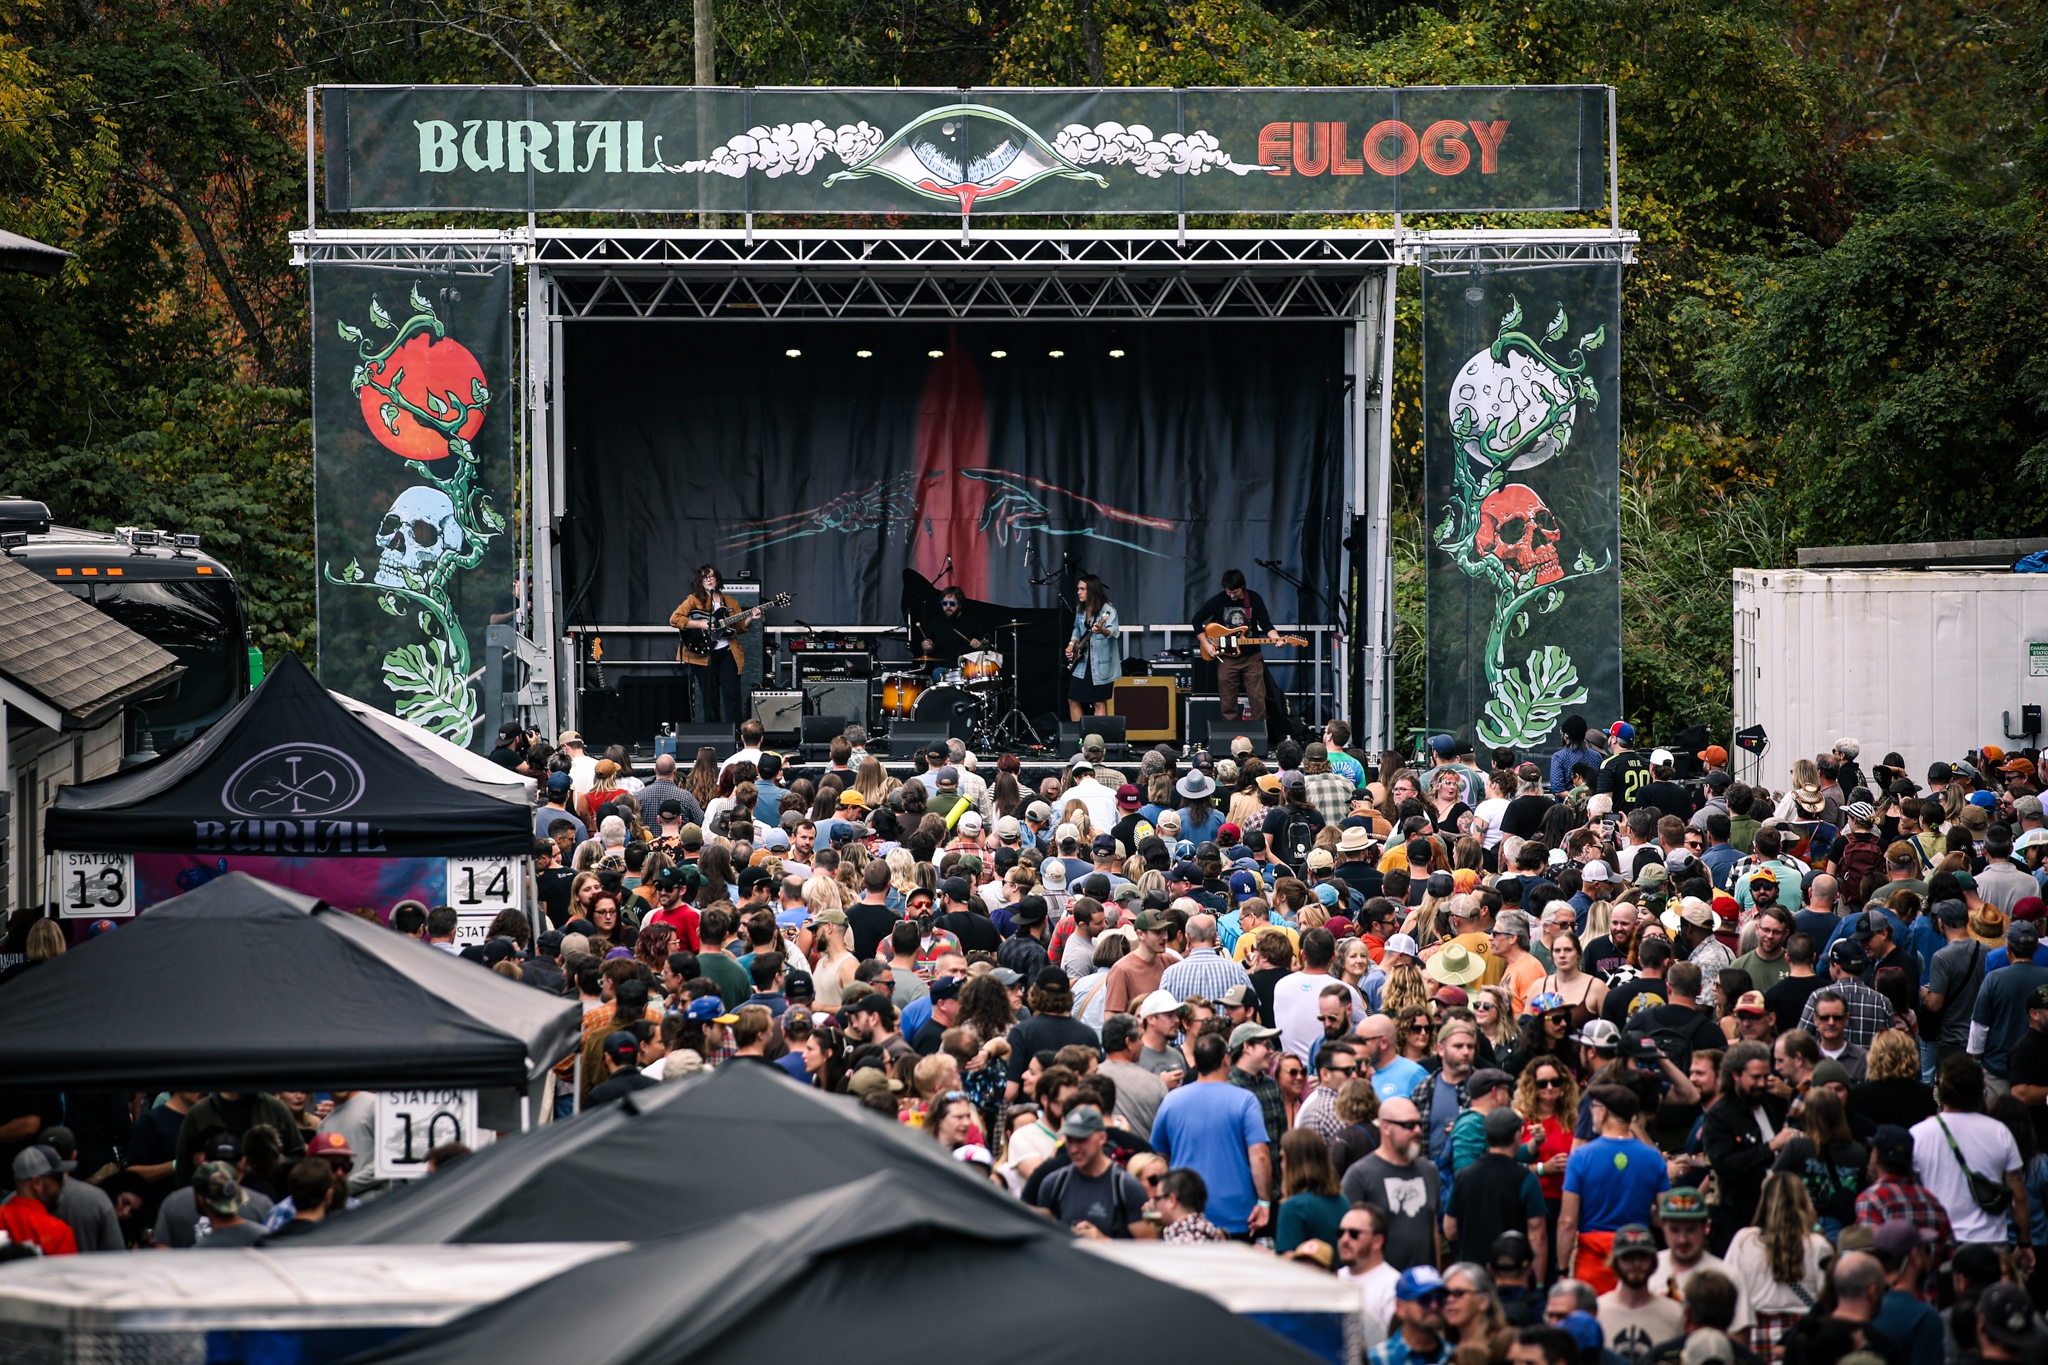 The Annual Burial Burnpile event is a music beer and arts festival held in Western North Carolina.